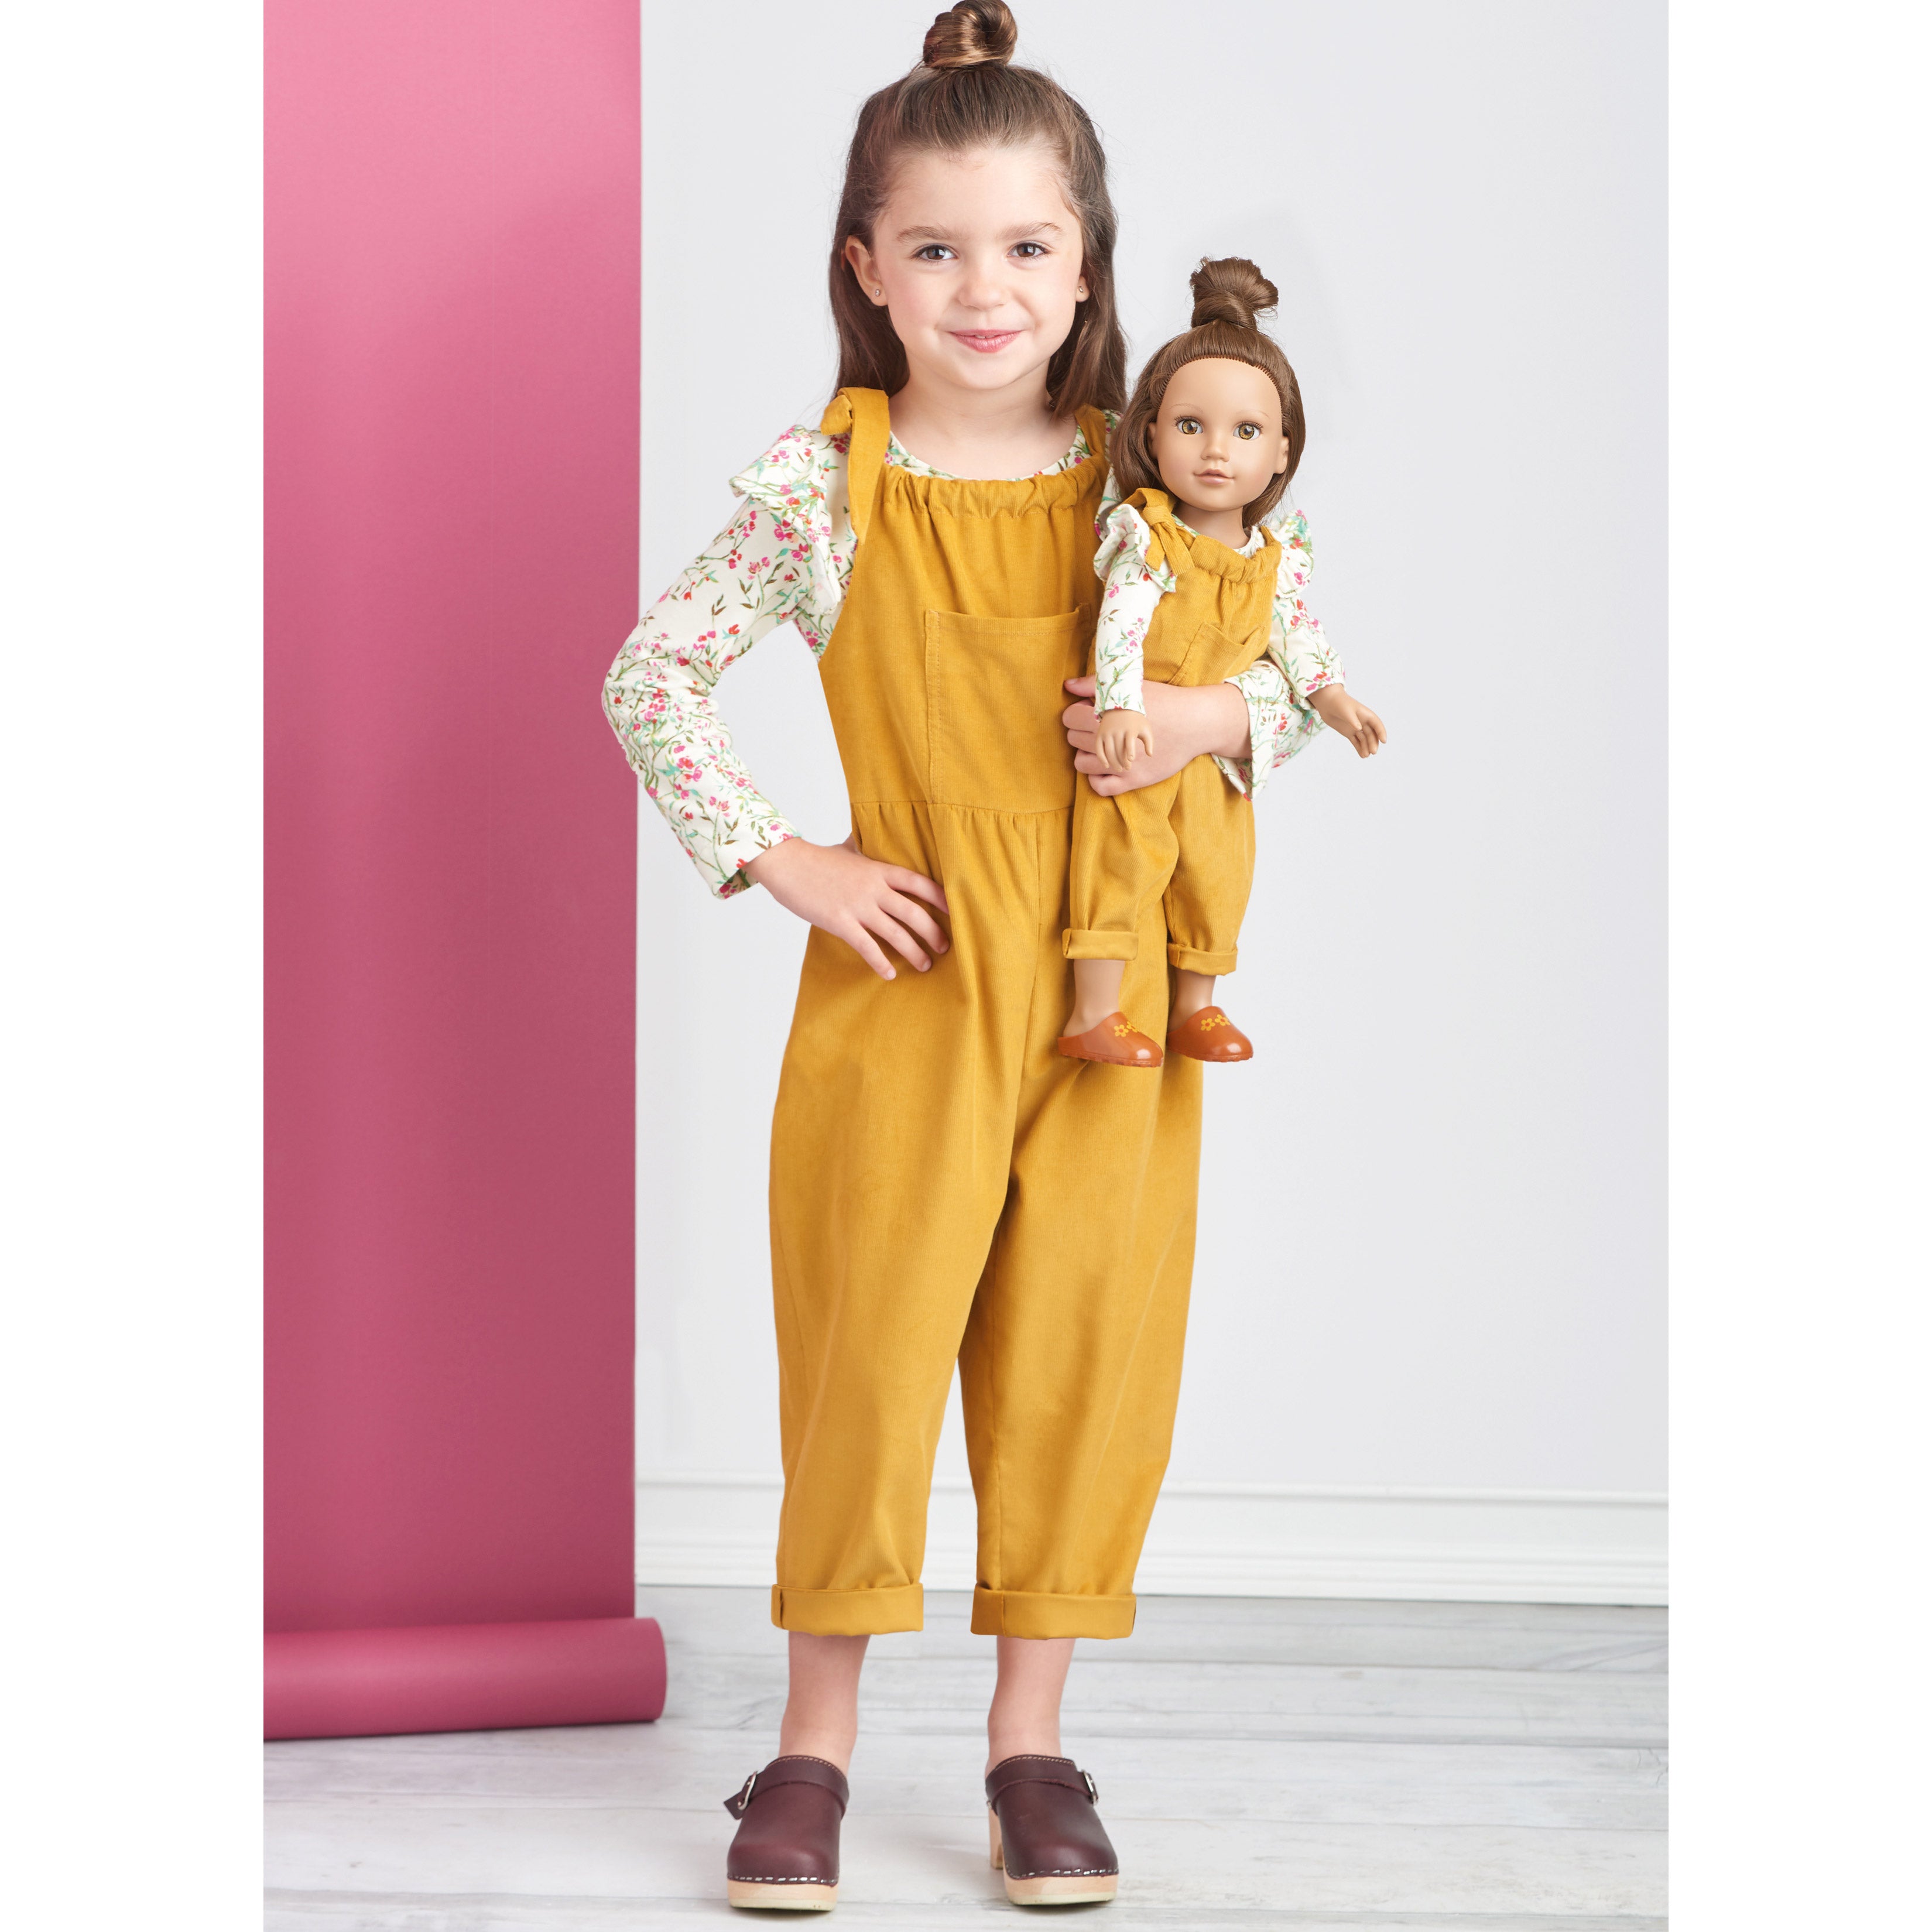 Simplicity pattern 9661 Children's Tops, Overalls, Jumper and Doll Clothes from Jaycotts Sewing Supplies